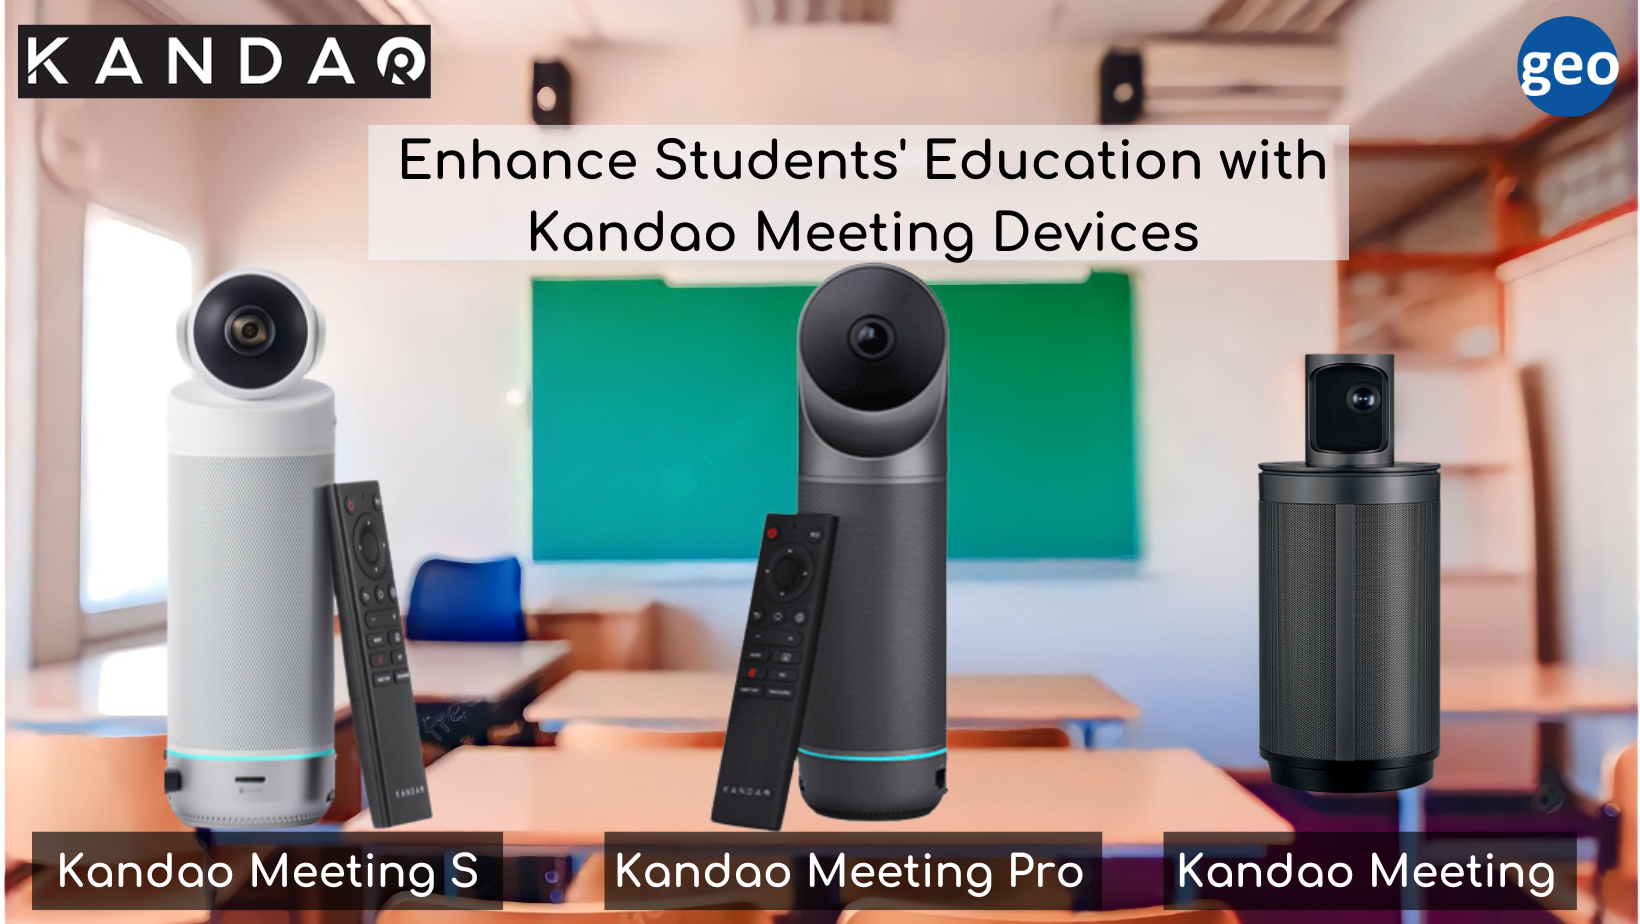 Kandao: 360 Video Conferencing for Blended Learning